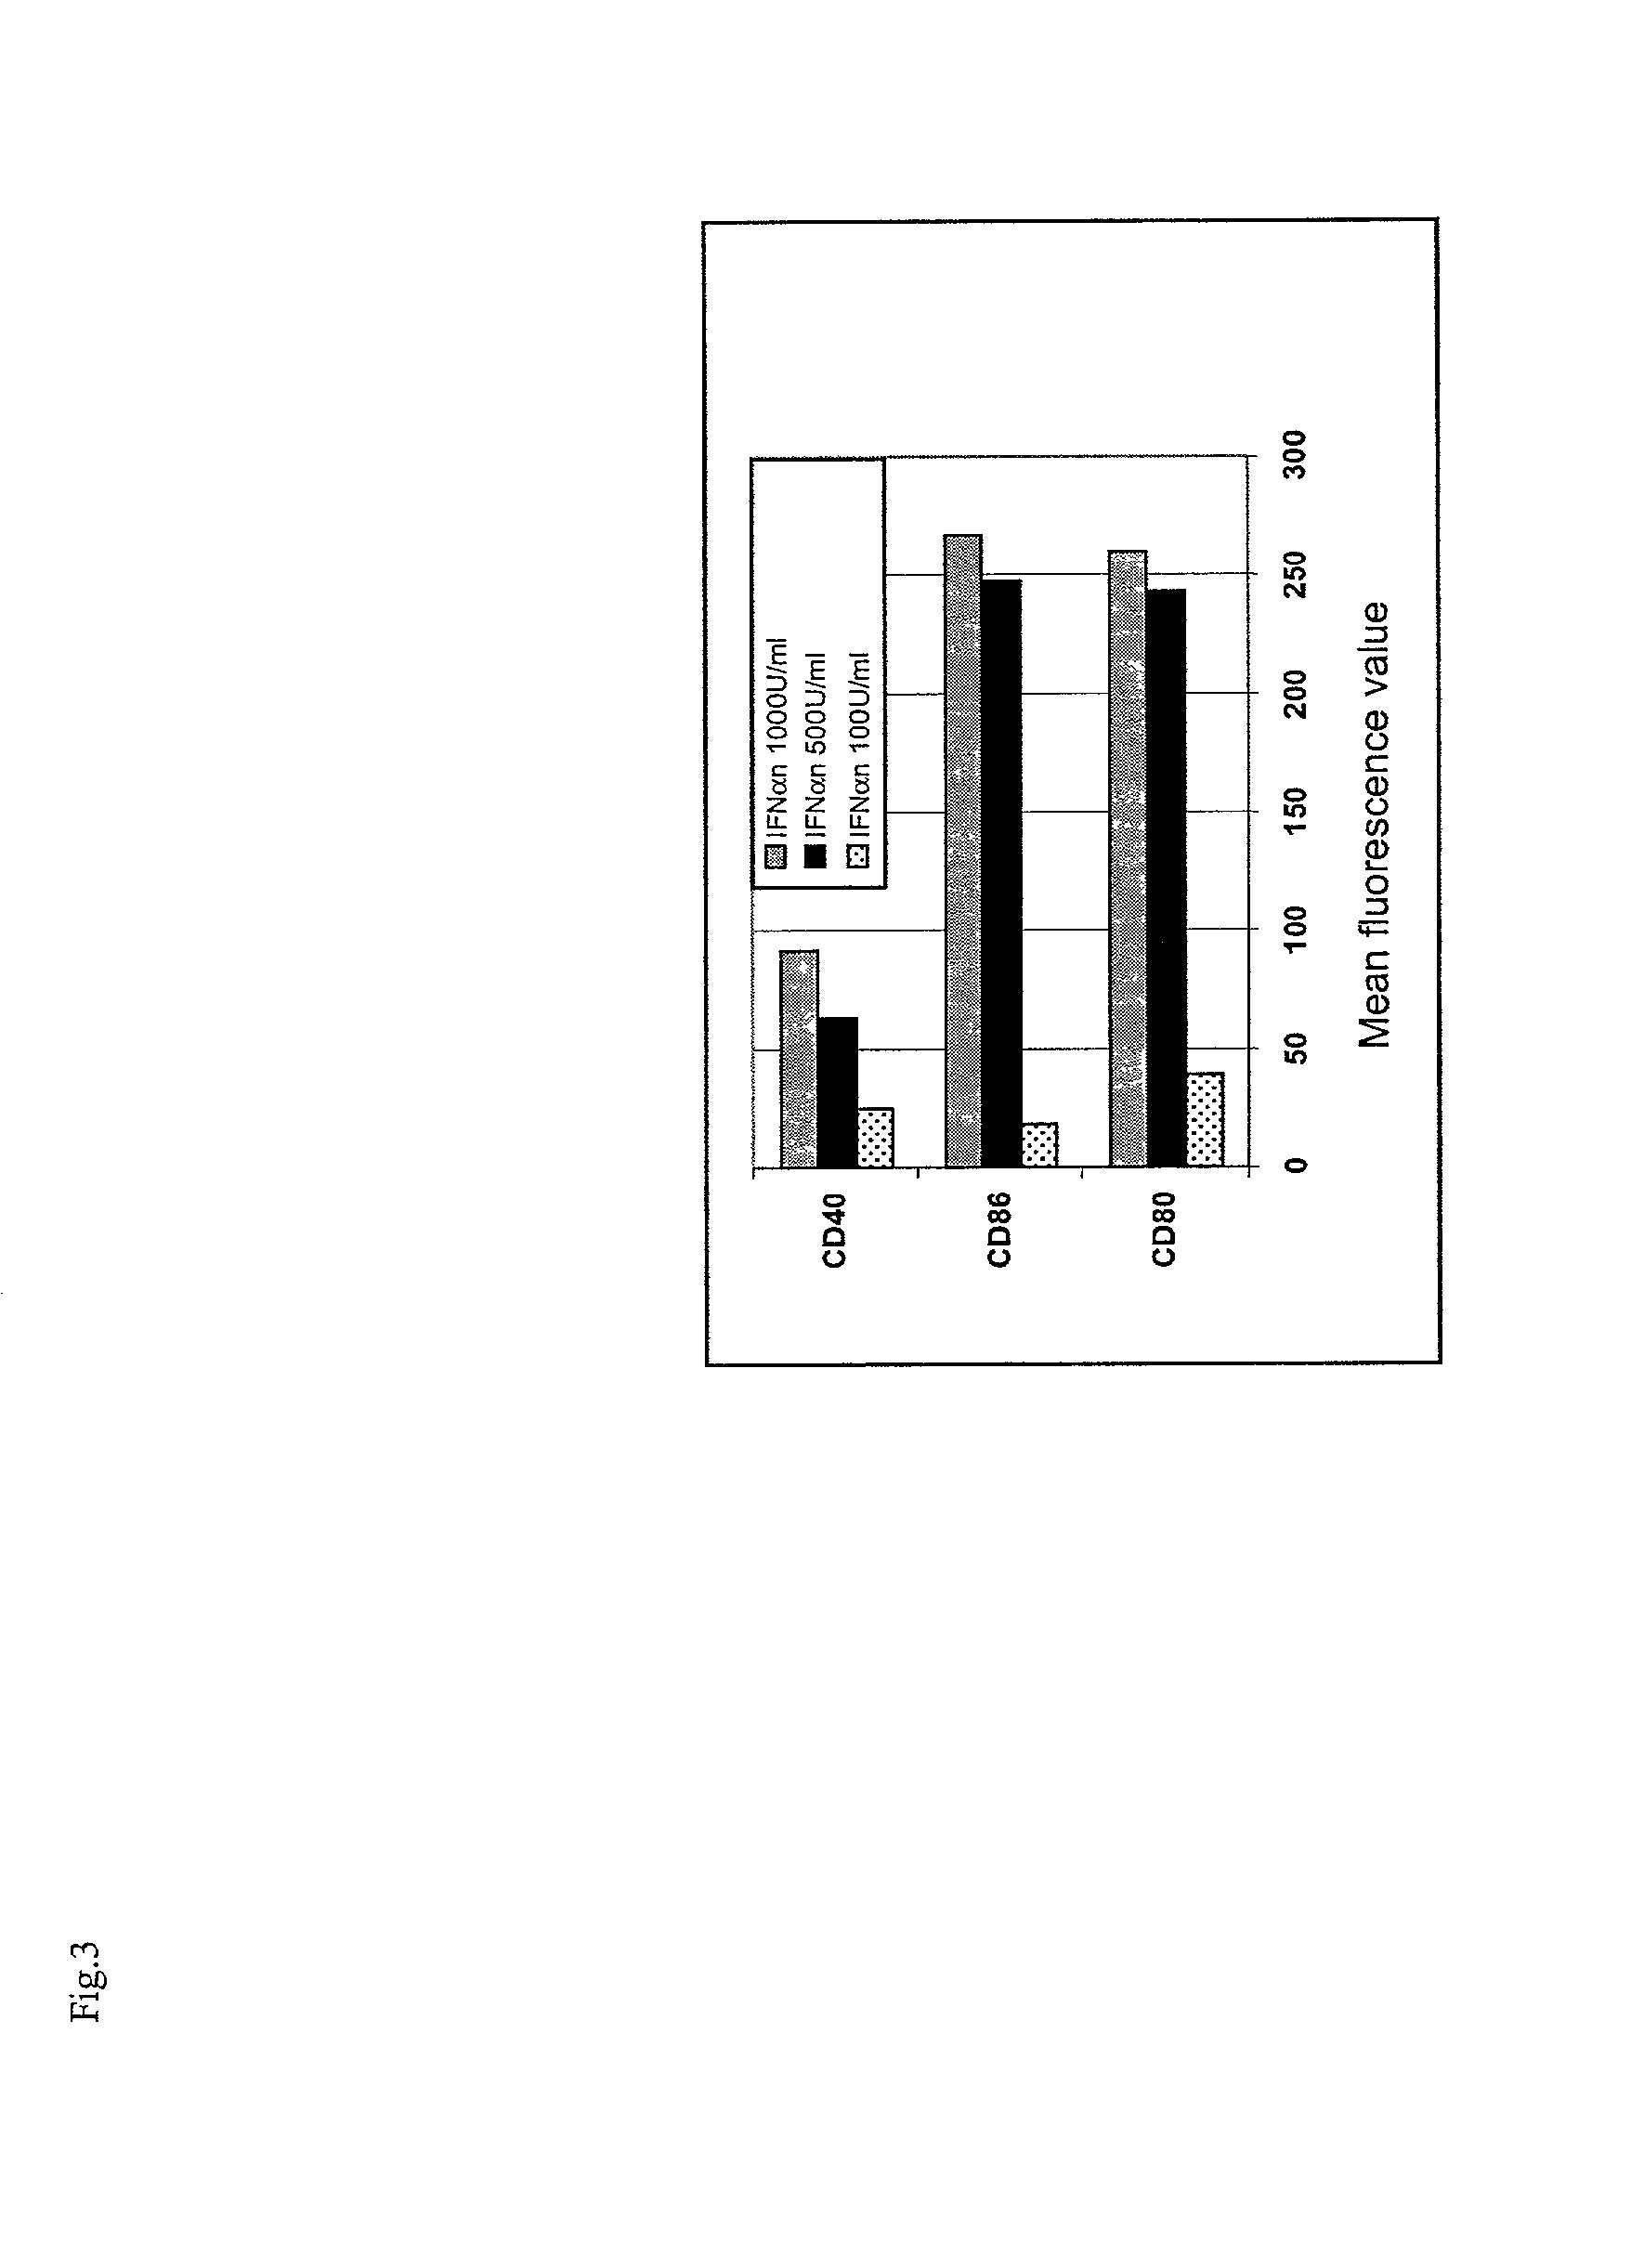 Method for generating highly active human dendritic cells from peripheral blood mononuclear cells